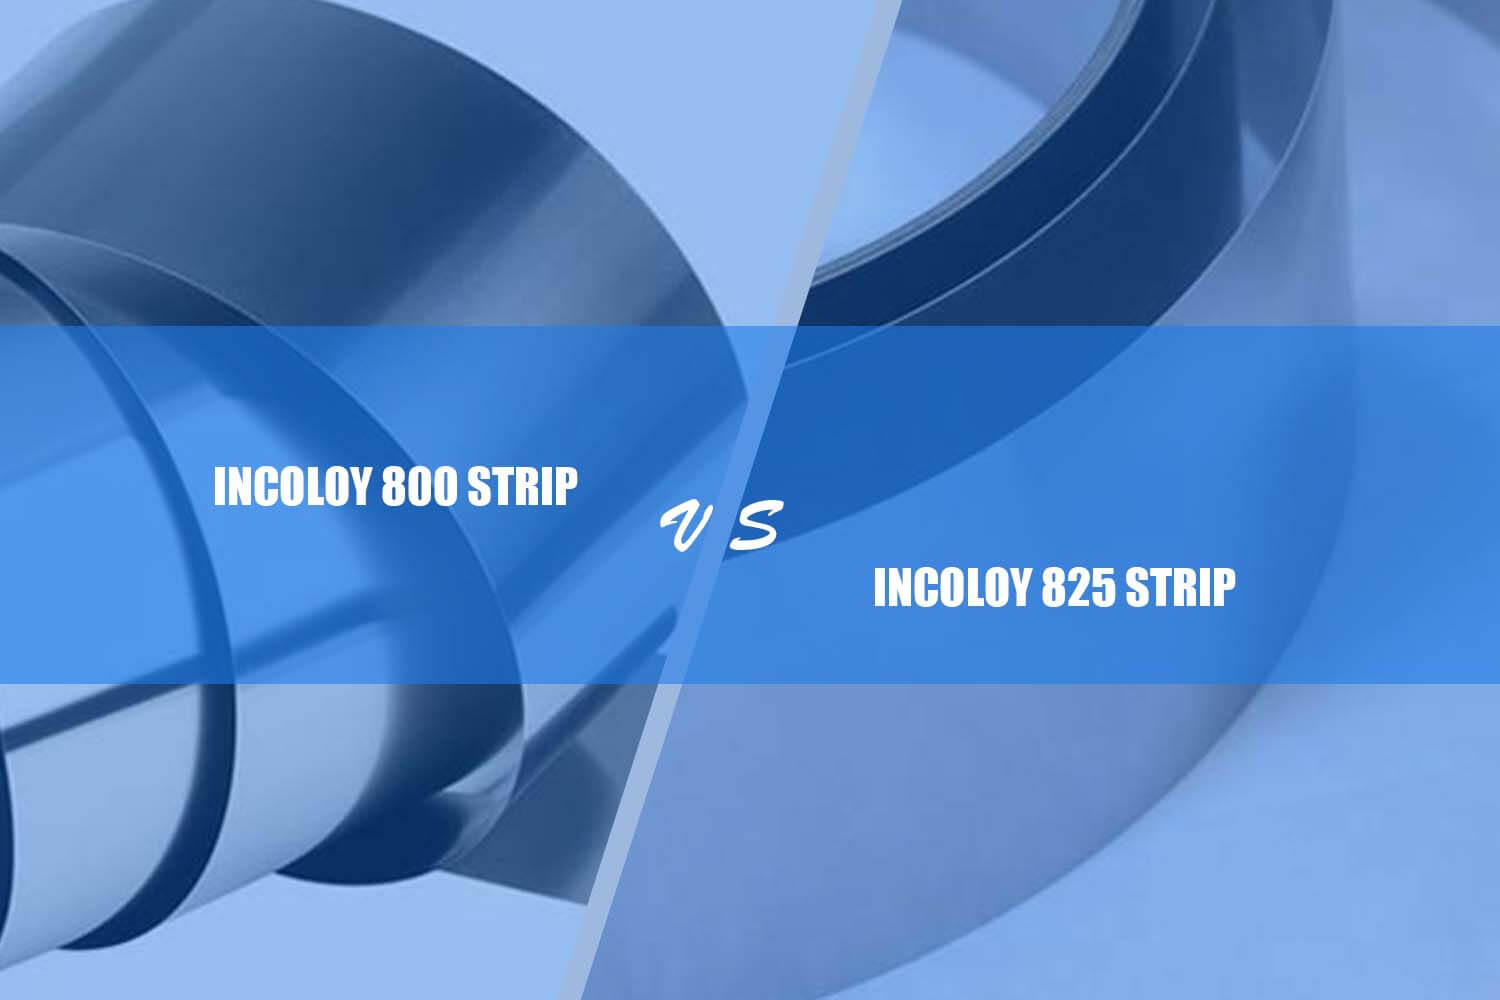 difference between incoloy 800 strip and incoloy 825 faixa